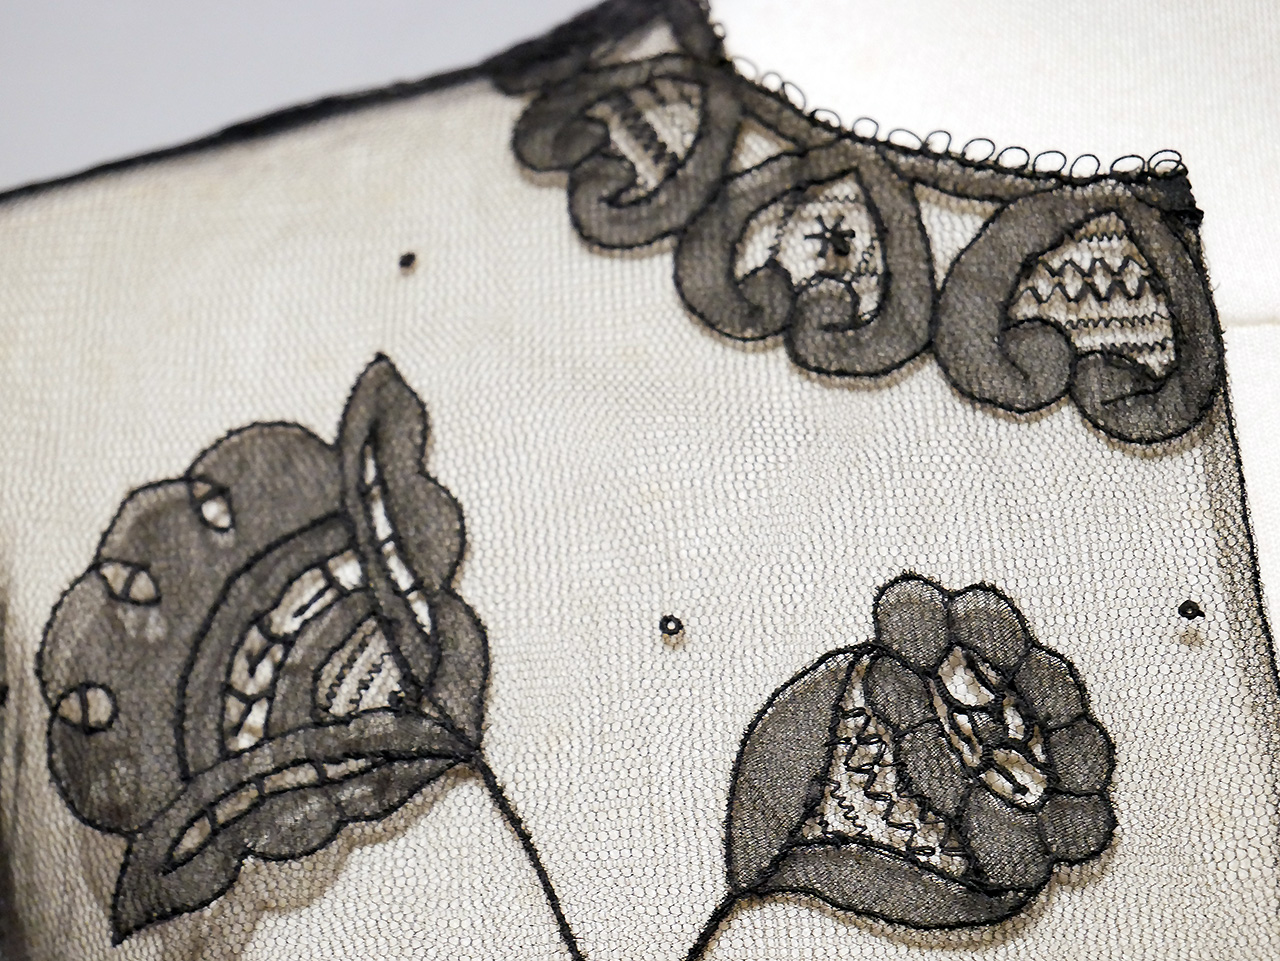 Headford Lace Project Blog - Sybil Connolly exhibition at The Hunt Museum in Limerick